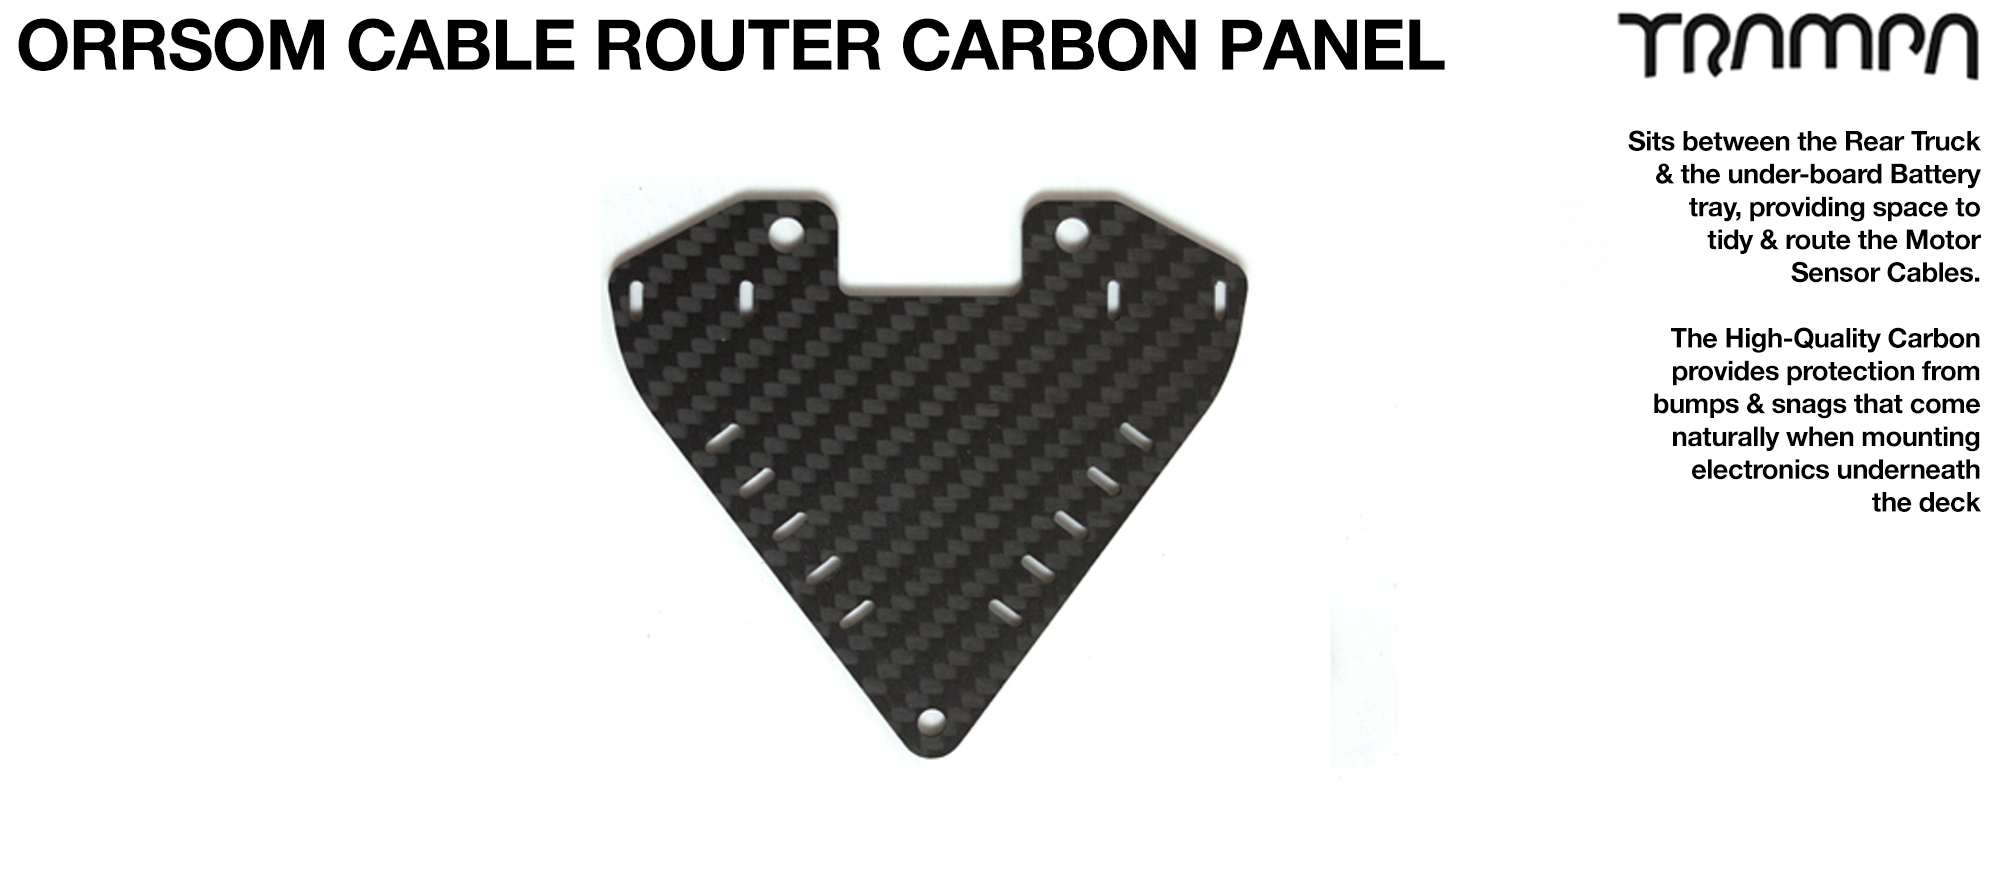 Cable Router for ORRSOM Longboard